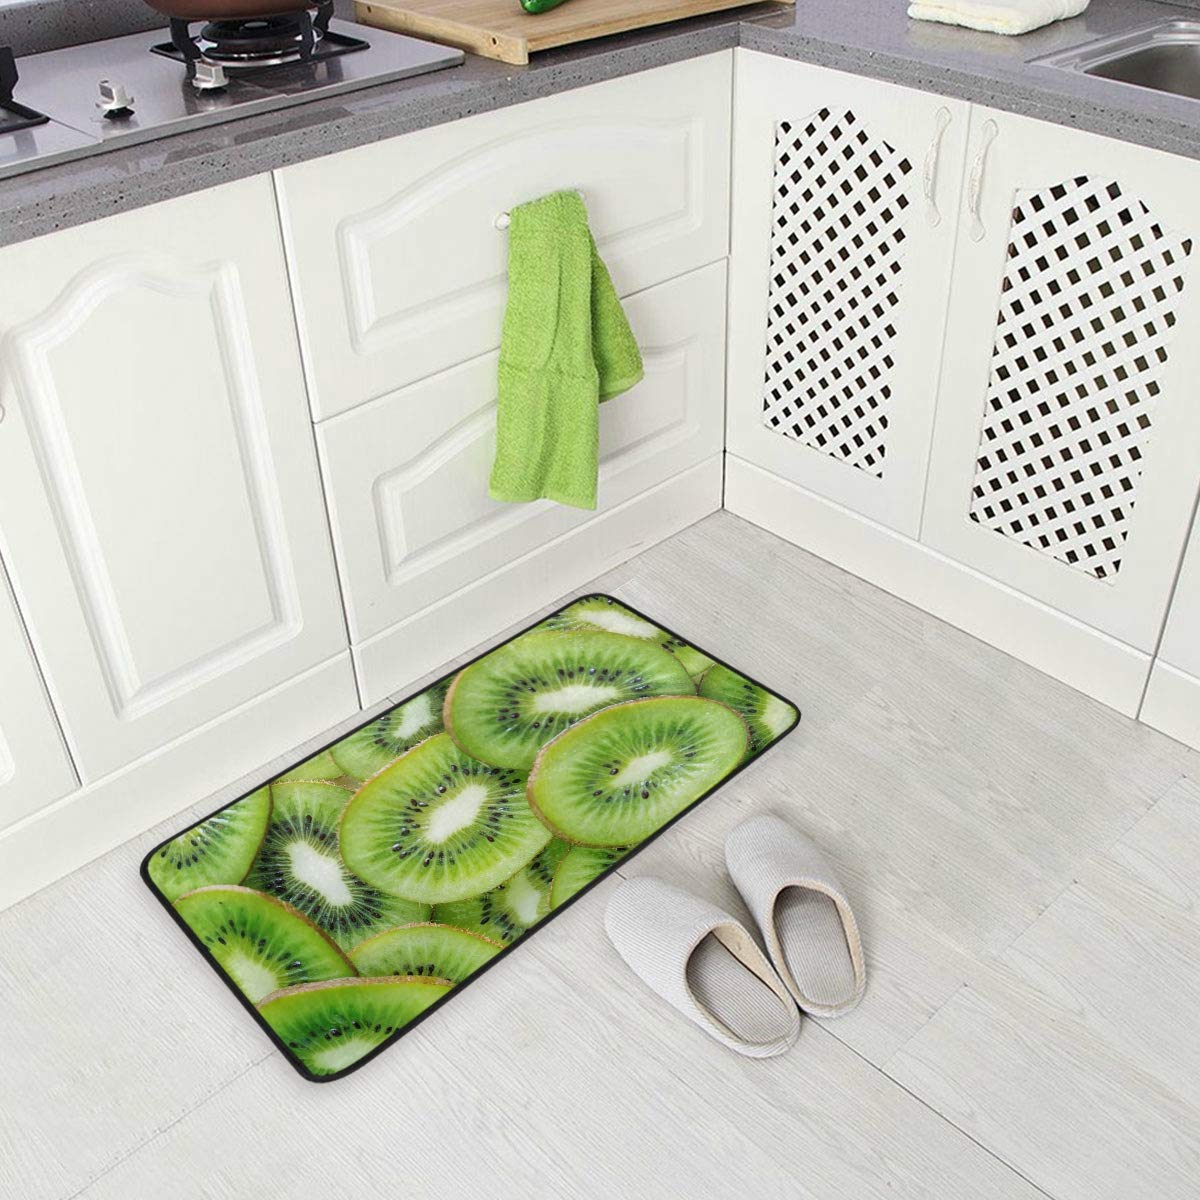 DOMIKING Kitchen Mat Floor Rug - Green Kiwi Fruit Non Slip Kitchen Mats Cushioned Washable Anti-Fatigue Office Chair Mat 20x20in for Home Decoration Bathroom Farmhouse